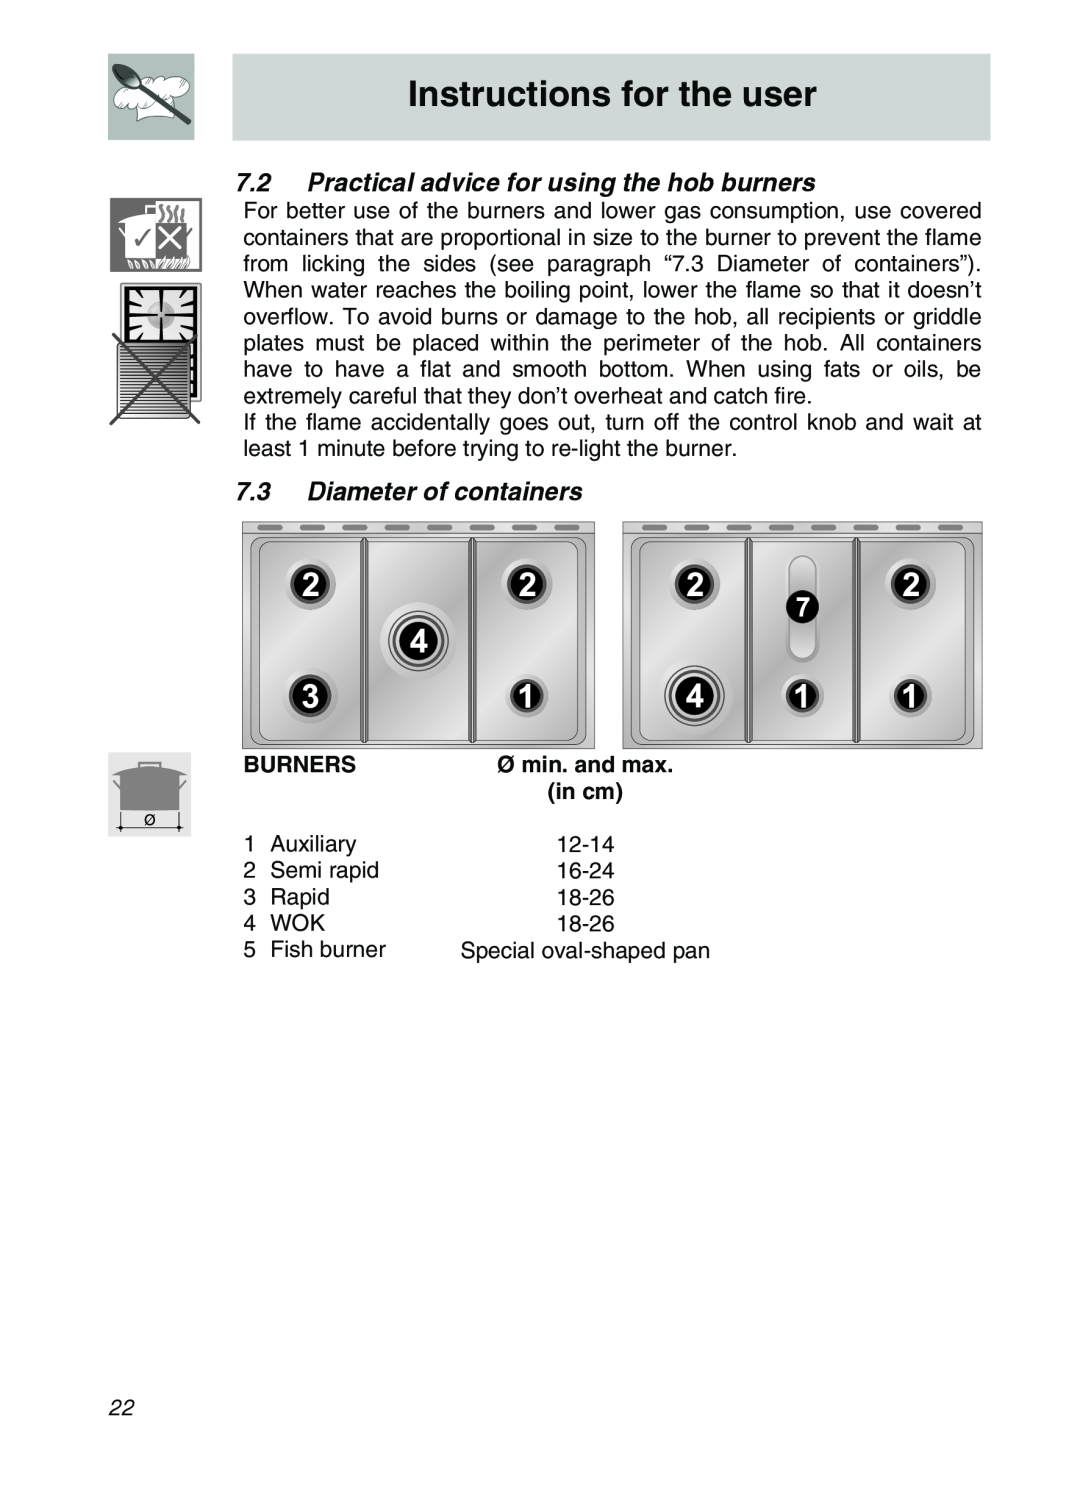 Smeg SA9065XNG Practical advice for using the hob burners, Diameter of containers, Instructions for the user, Burners 